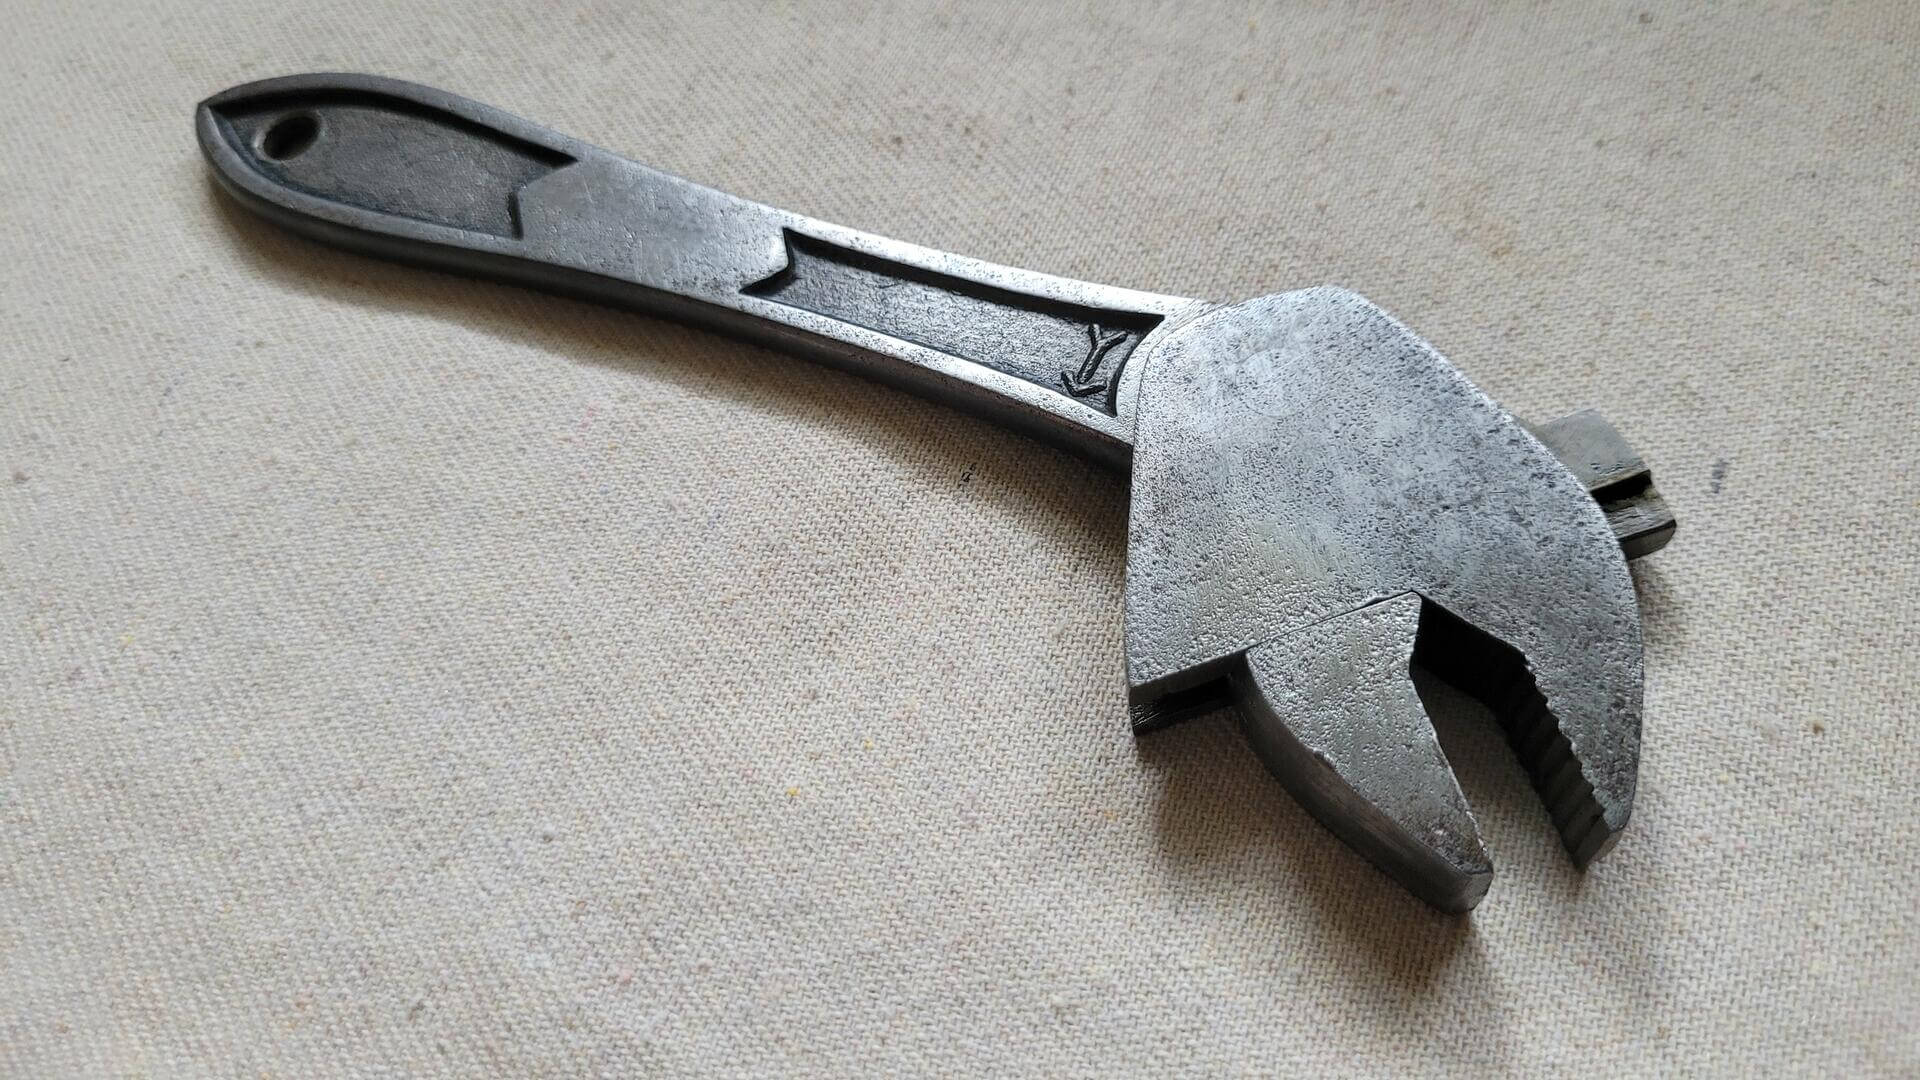 Rare Antique Swivel Head Adjustable Bidirectional Wrench - Vintage Collectible Hand Tools